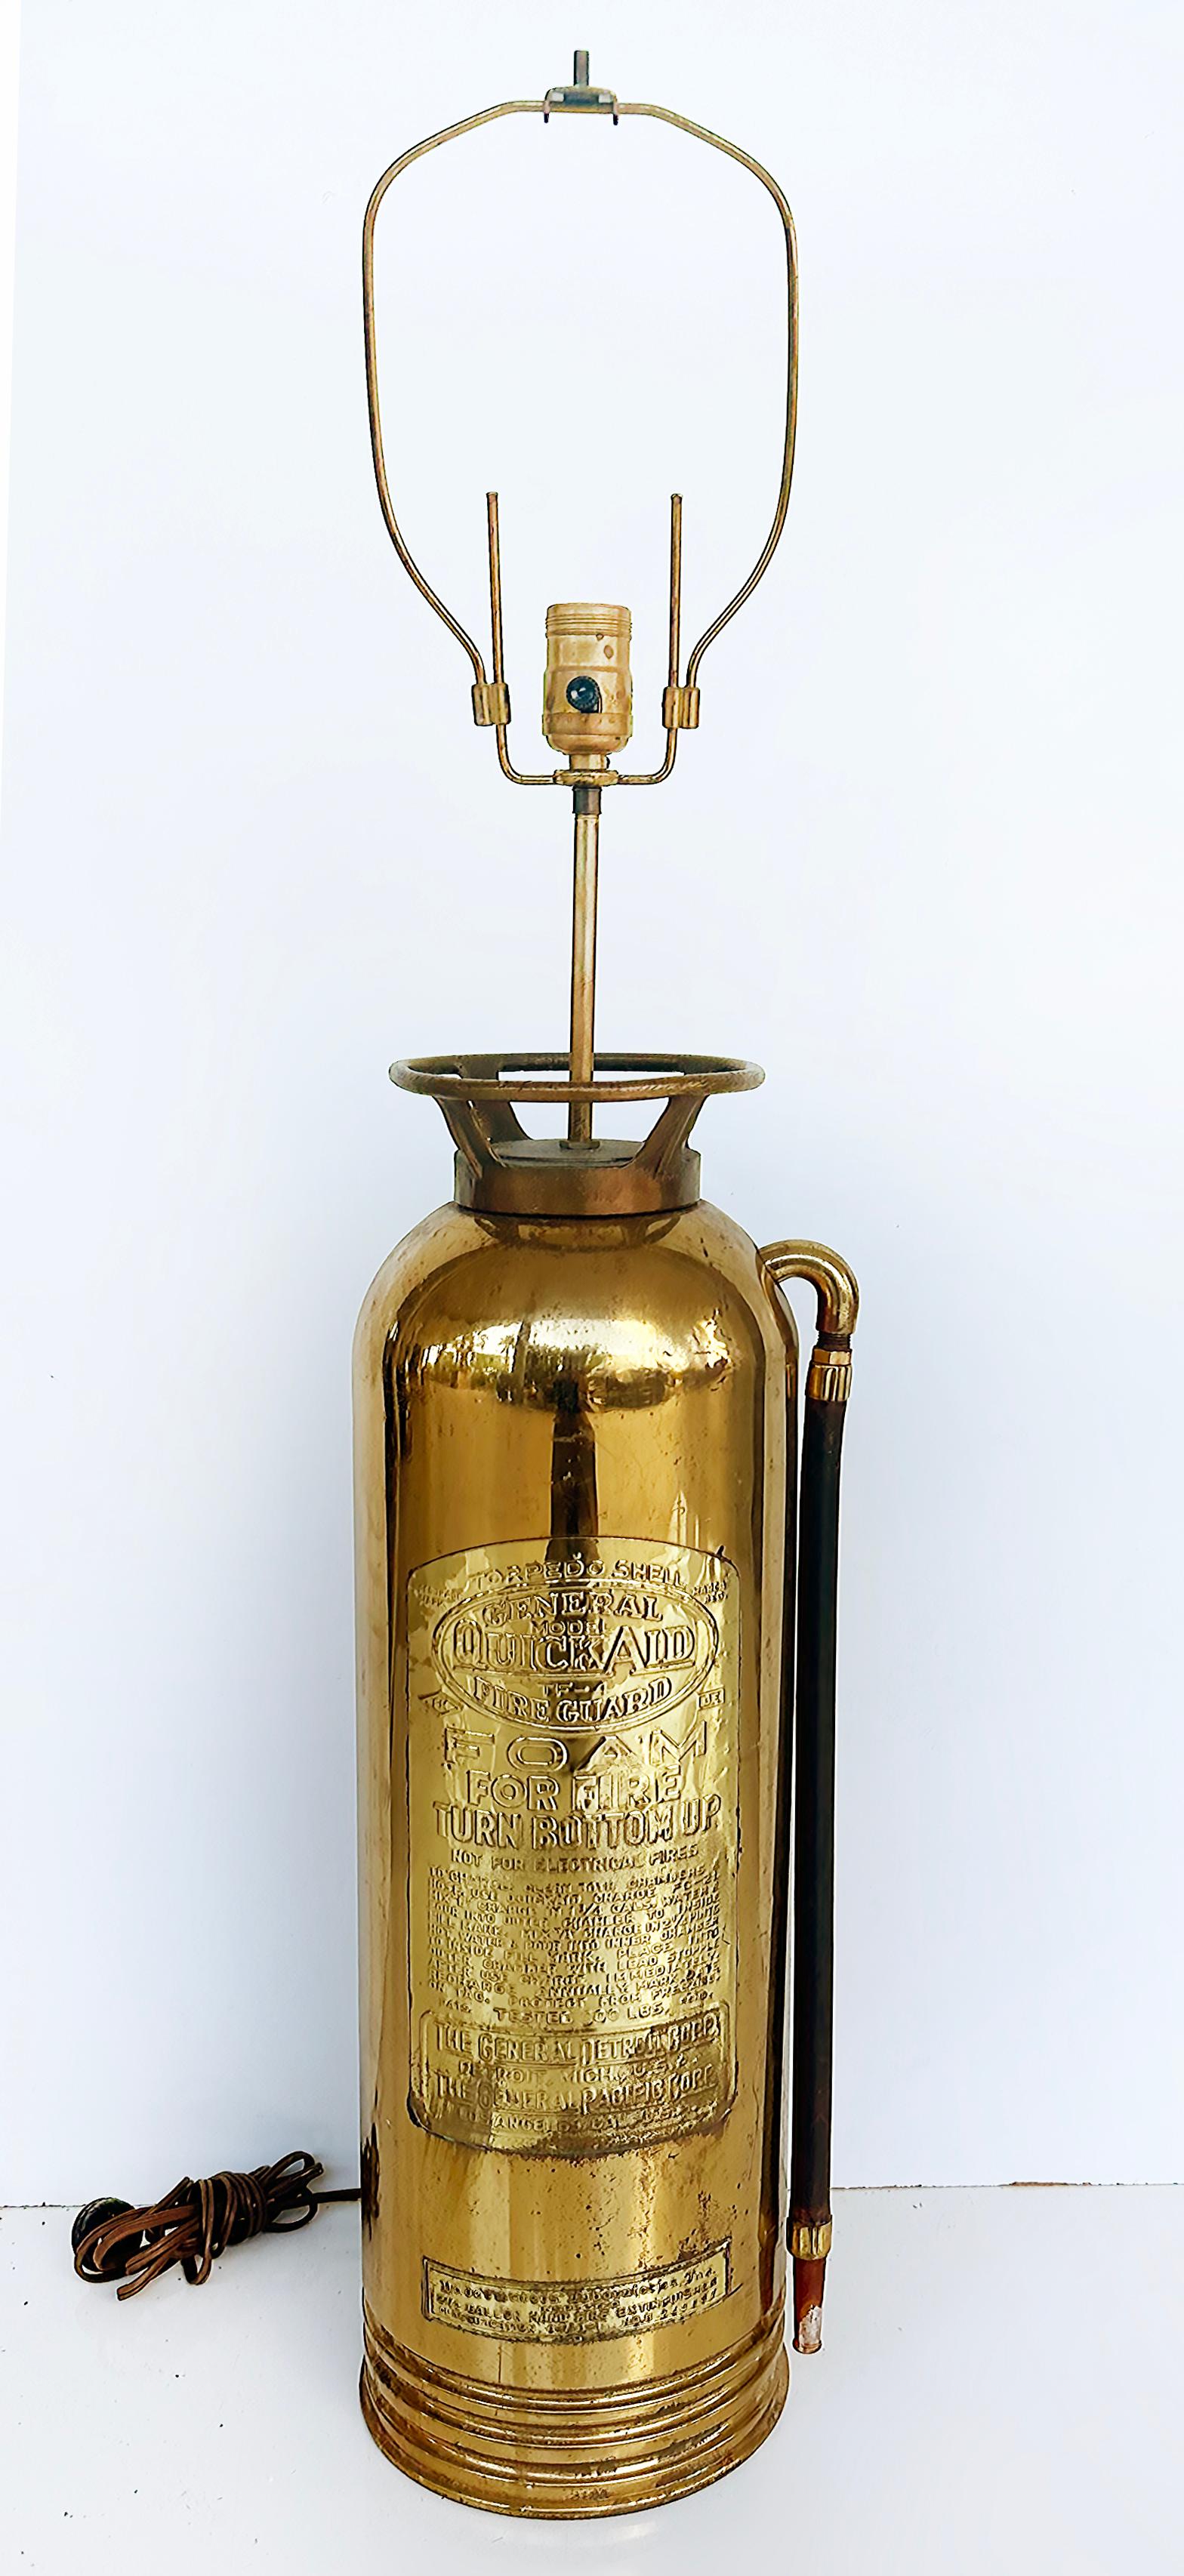 Antique Brass and Copper Fire Extinguisher Table Lamp



Offered for sale is an antique polished brass and copper fire extinguisher that was converted into a table lamp during the mid-20th century.  The extinguisher has a large decorative Torpedo's